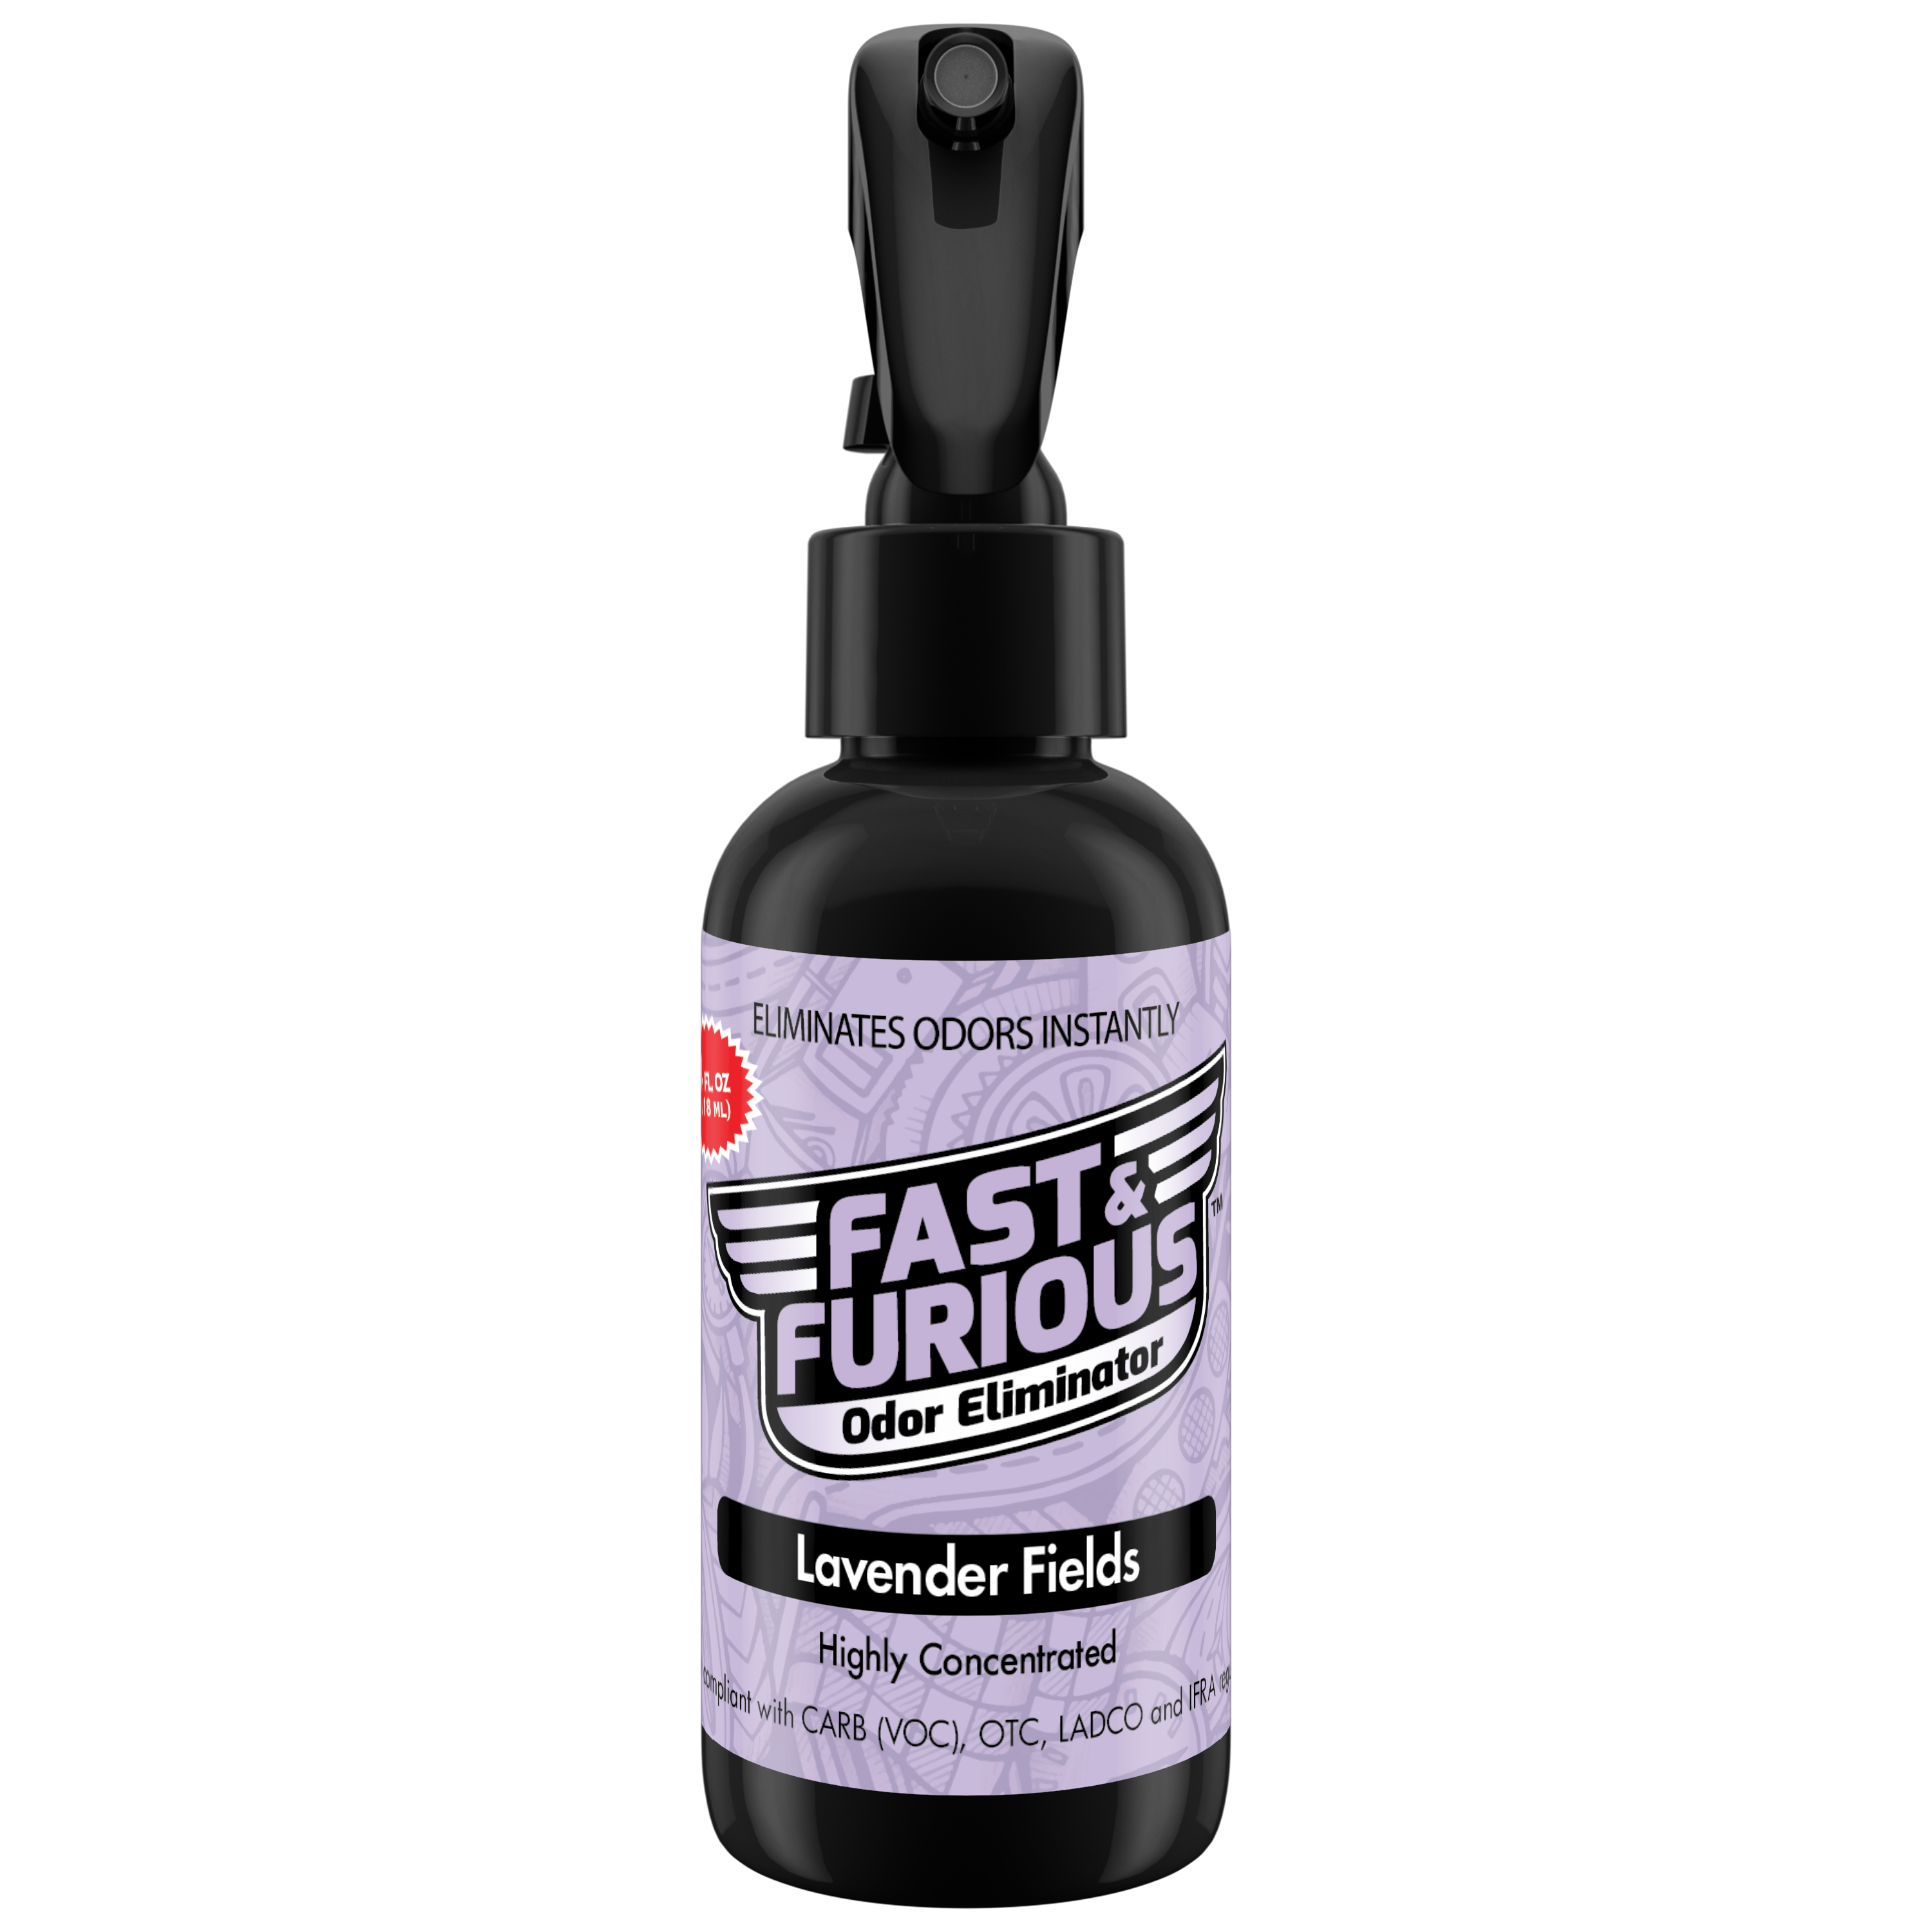 Fast and Furious Odor Eliminator - Lavender Fields Scent